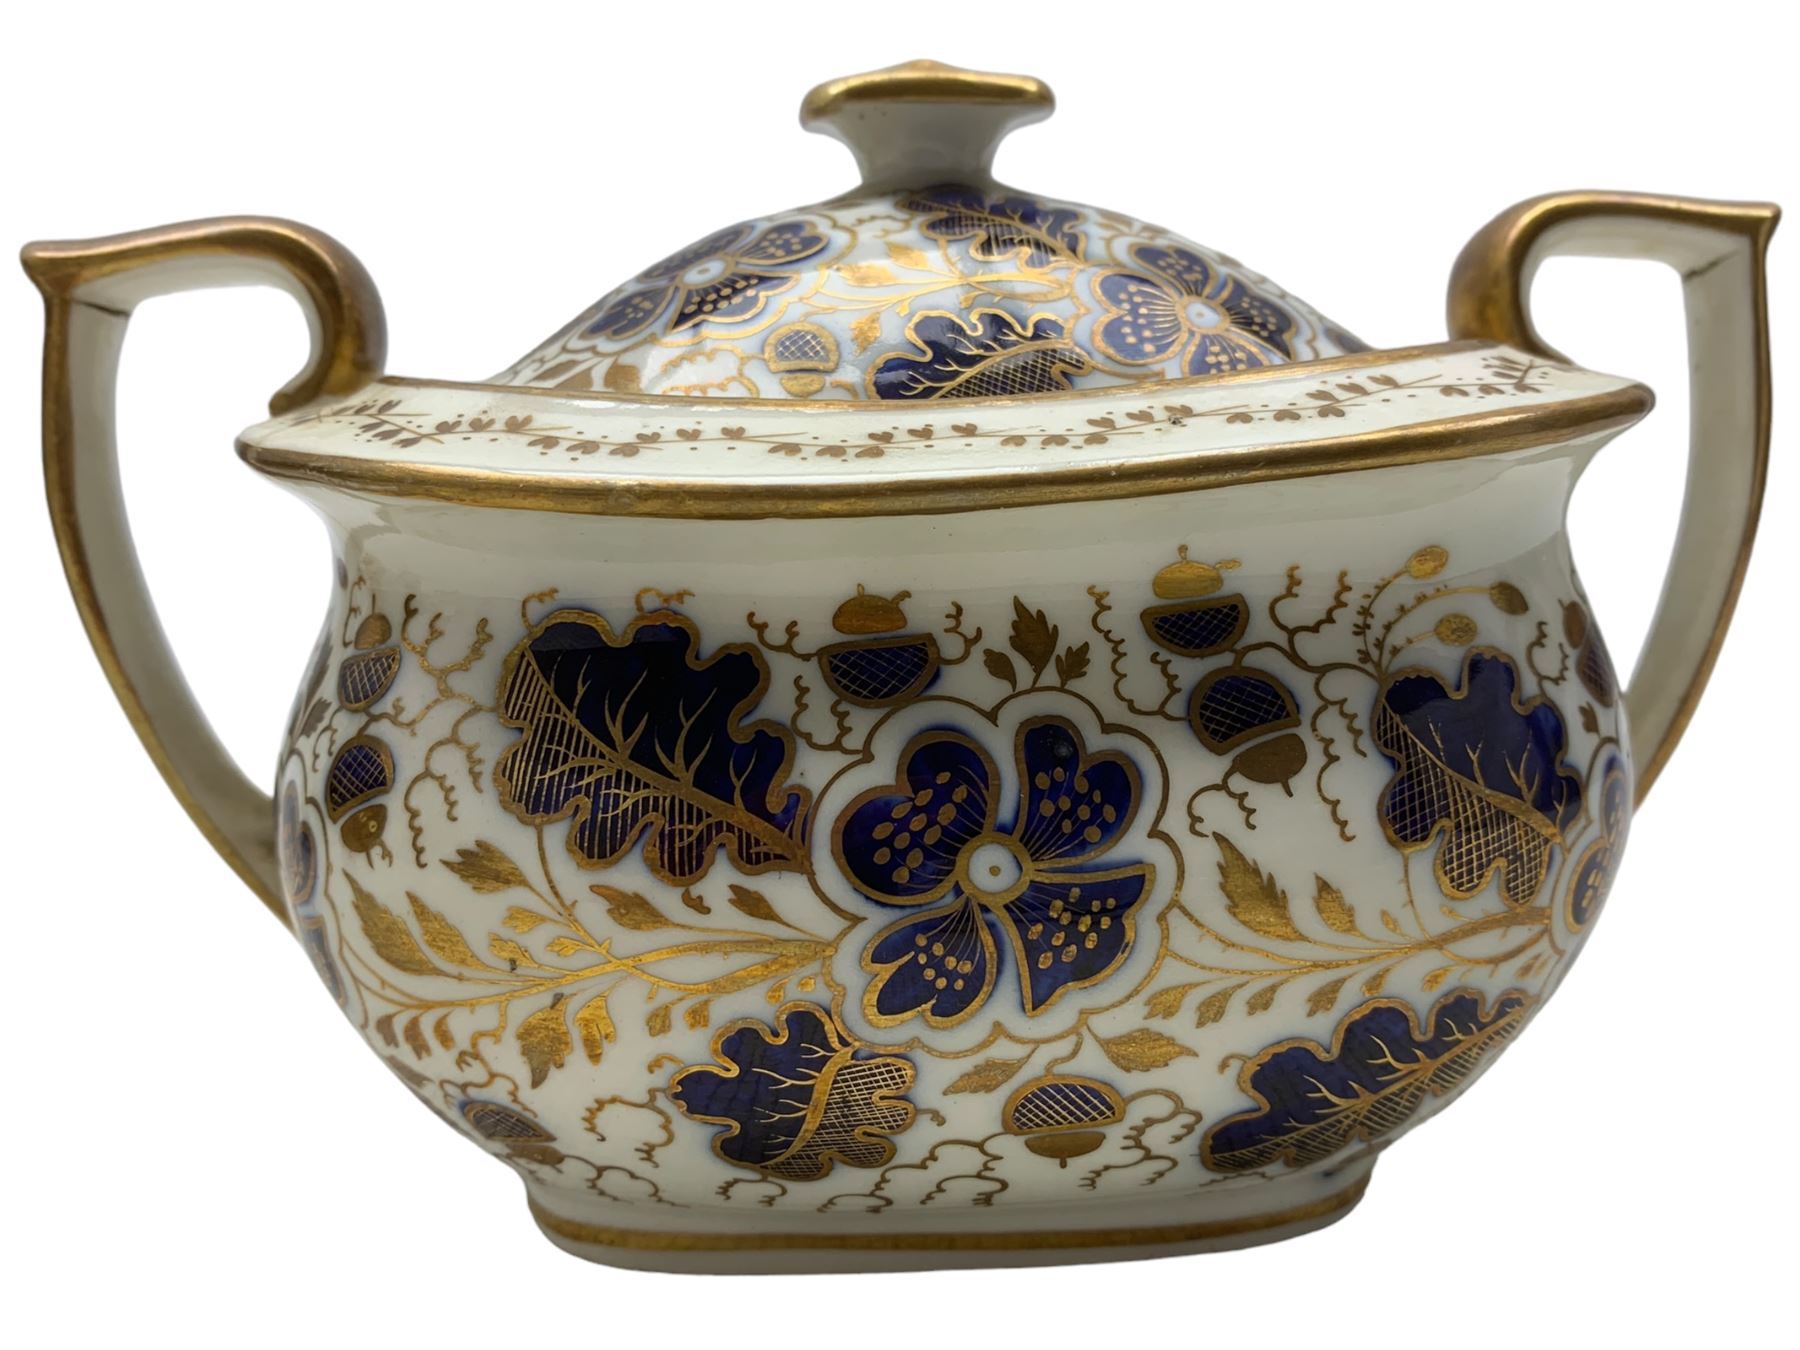 Late 18th century New Hall porcelain - Image 4 of 5